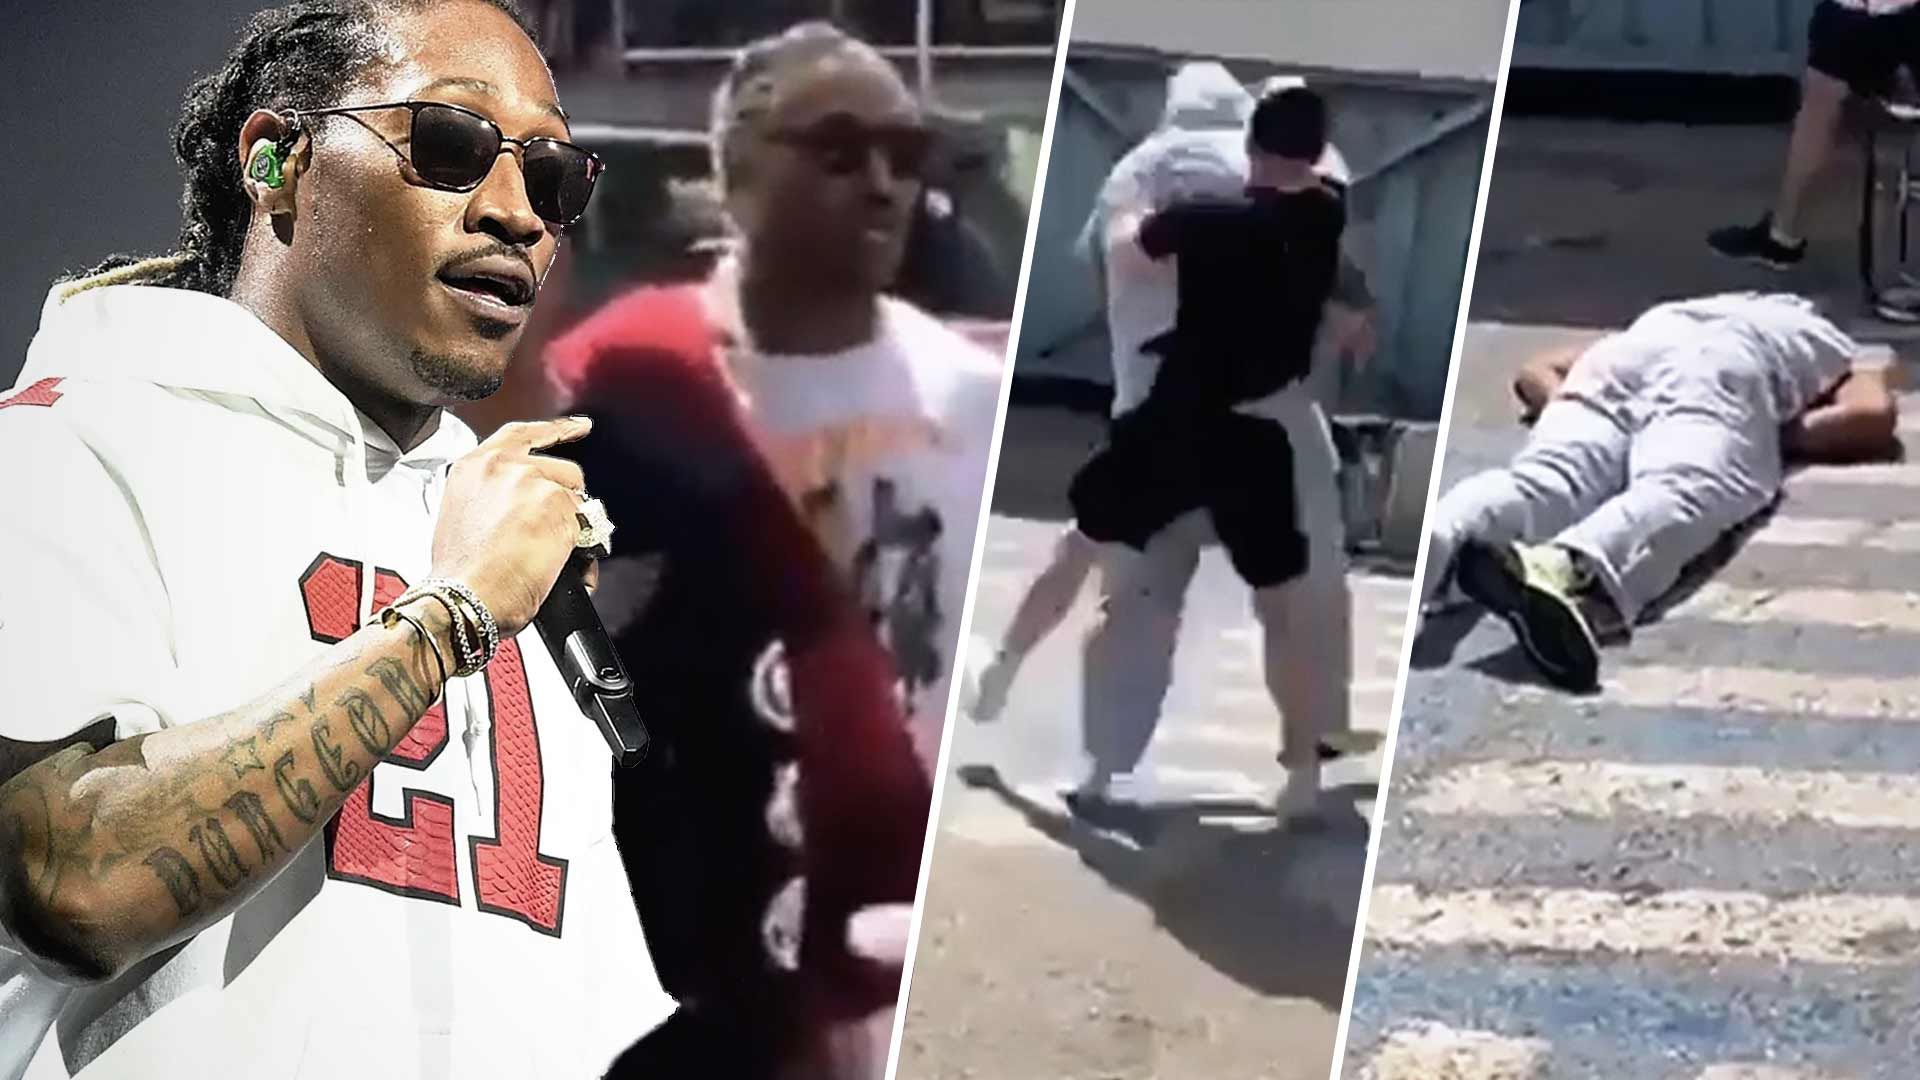 Rapper Future S Bodyguard Knocked Out Cold In Shocking Video After